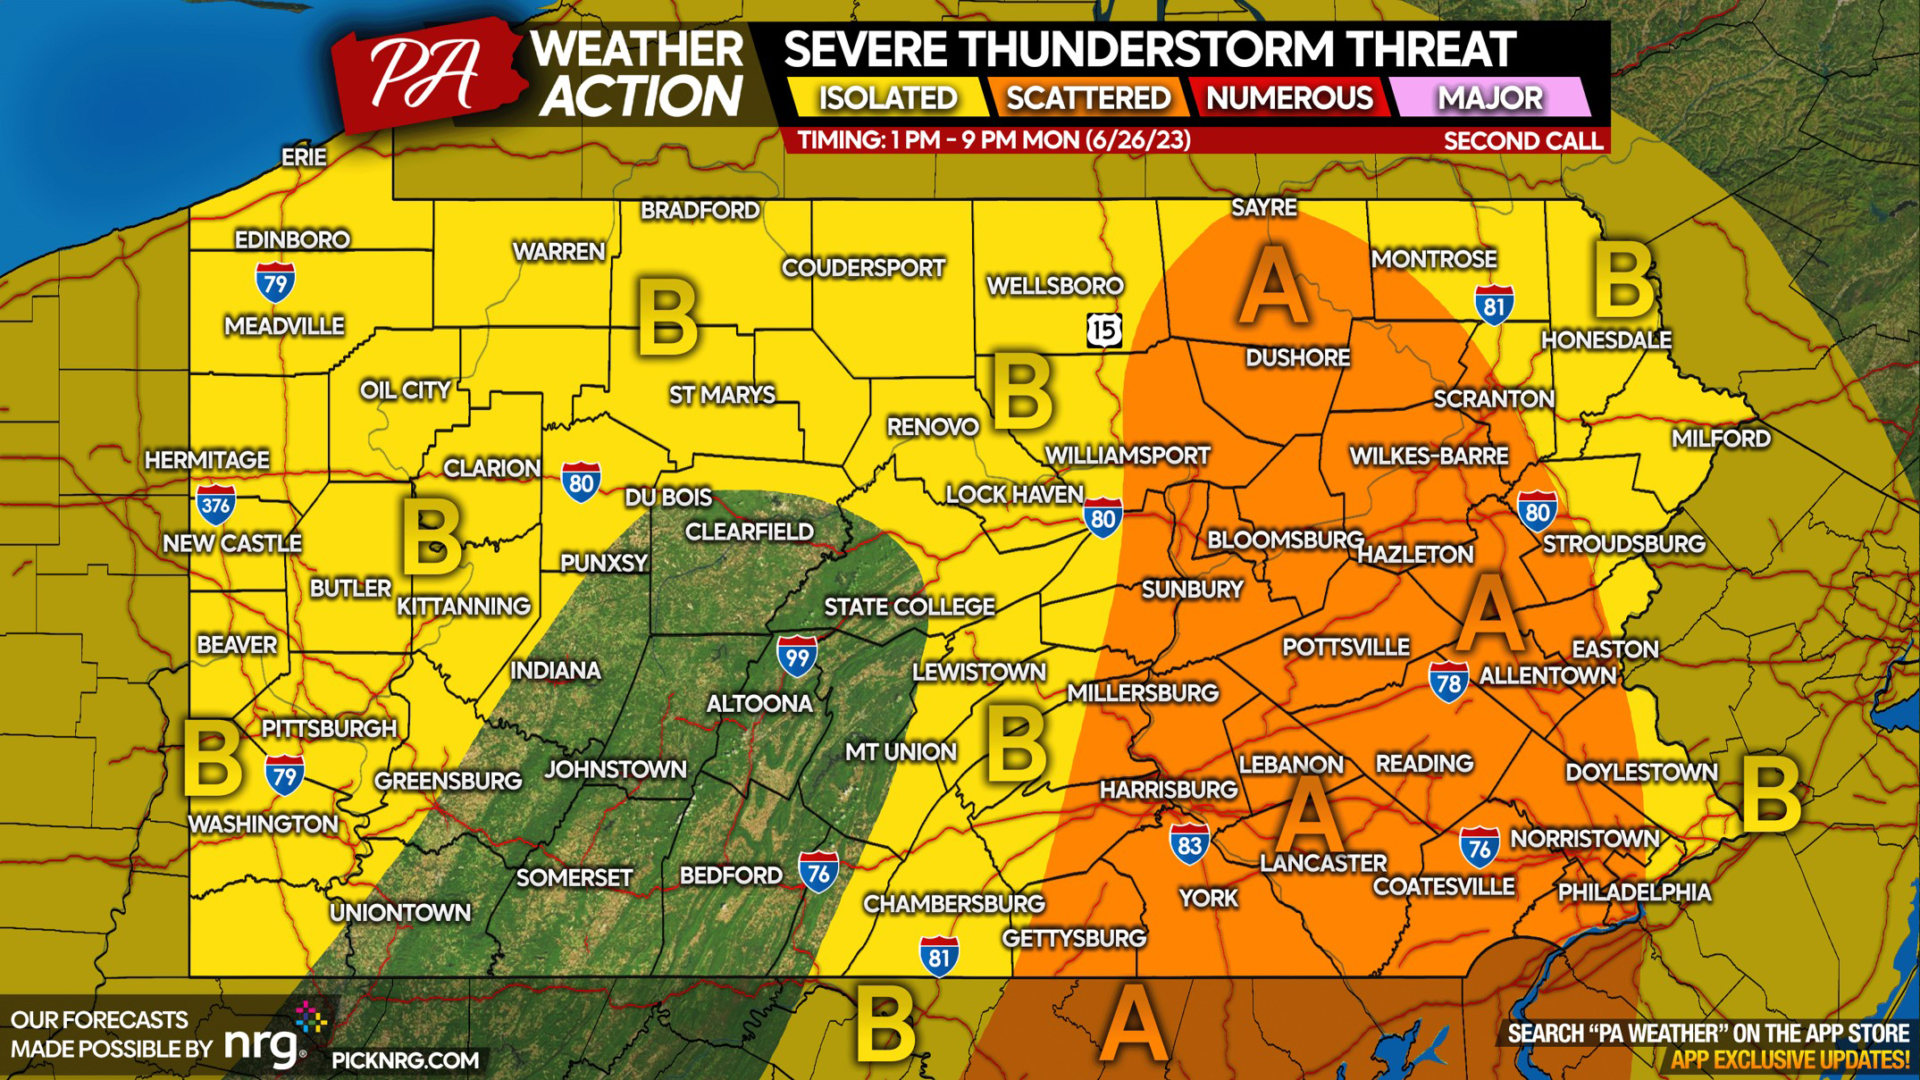 First Call Forecast for Monday’s Severe Thunderstorms in PA; Damaging Winds + Large Hail Possible